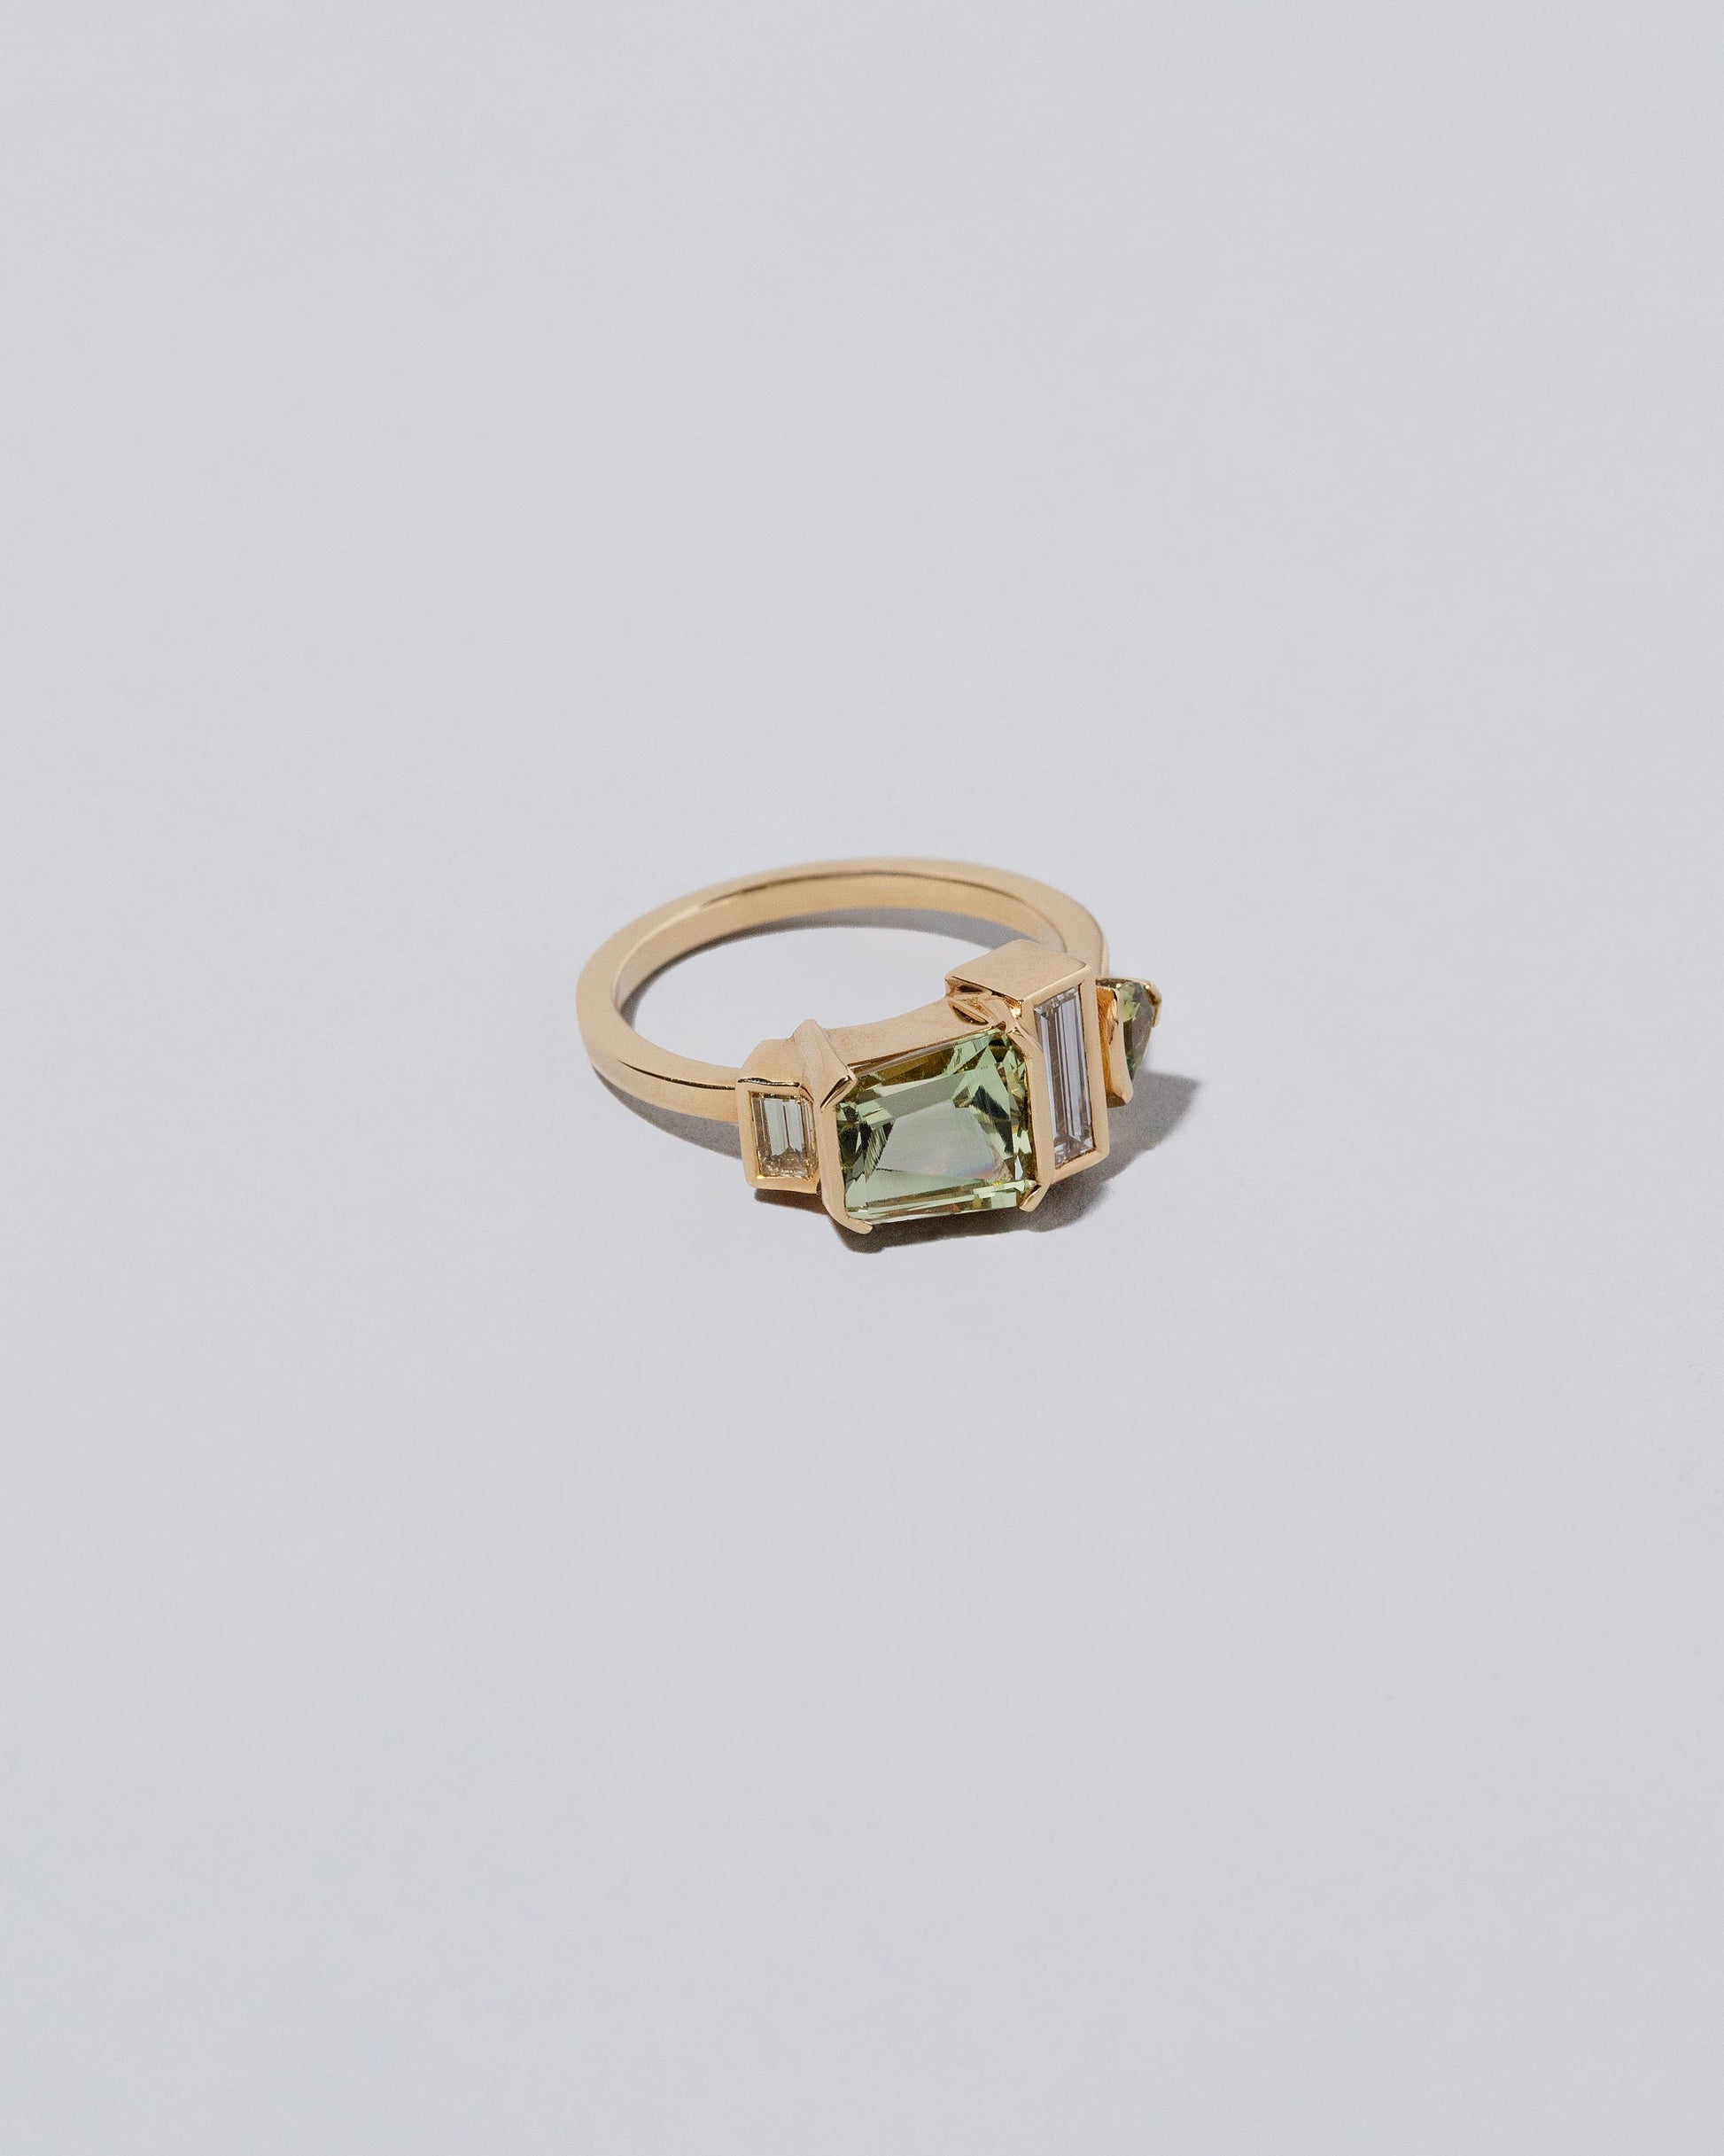 Product photo of Dutch Ring on light color background